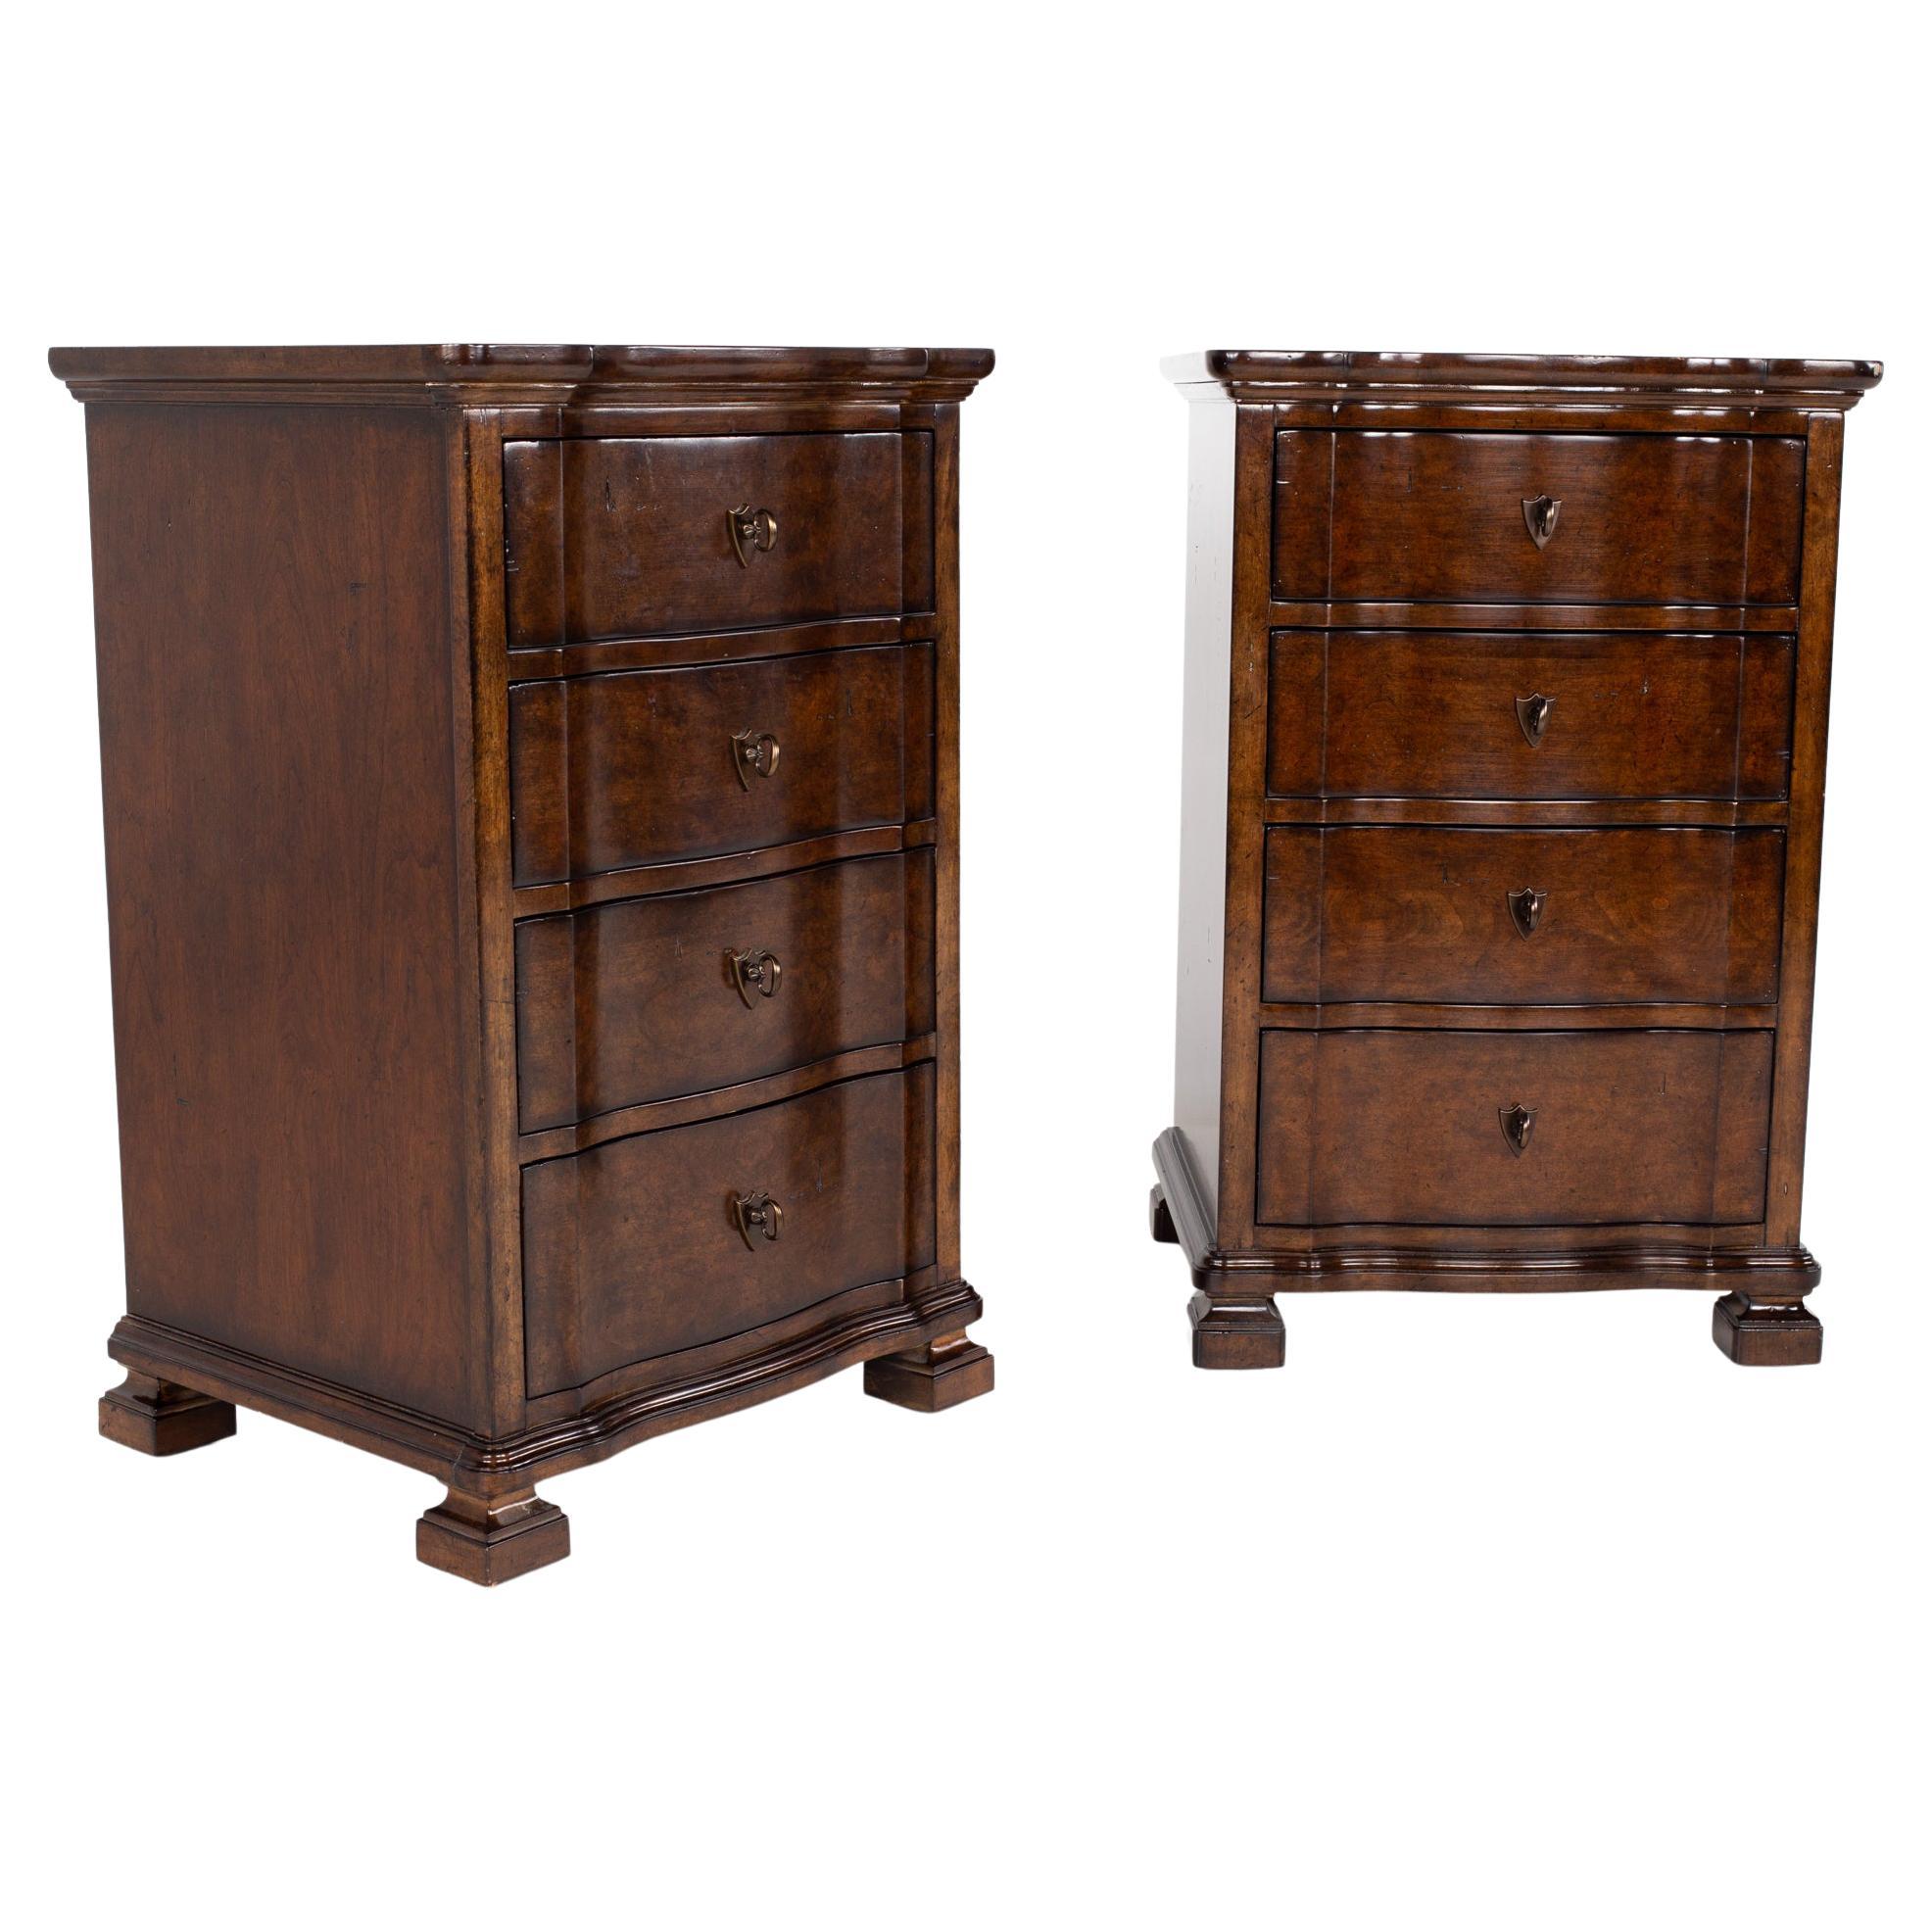 Stanley Wood 4 Drawer Bedside Tables Night Stands, a Pair